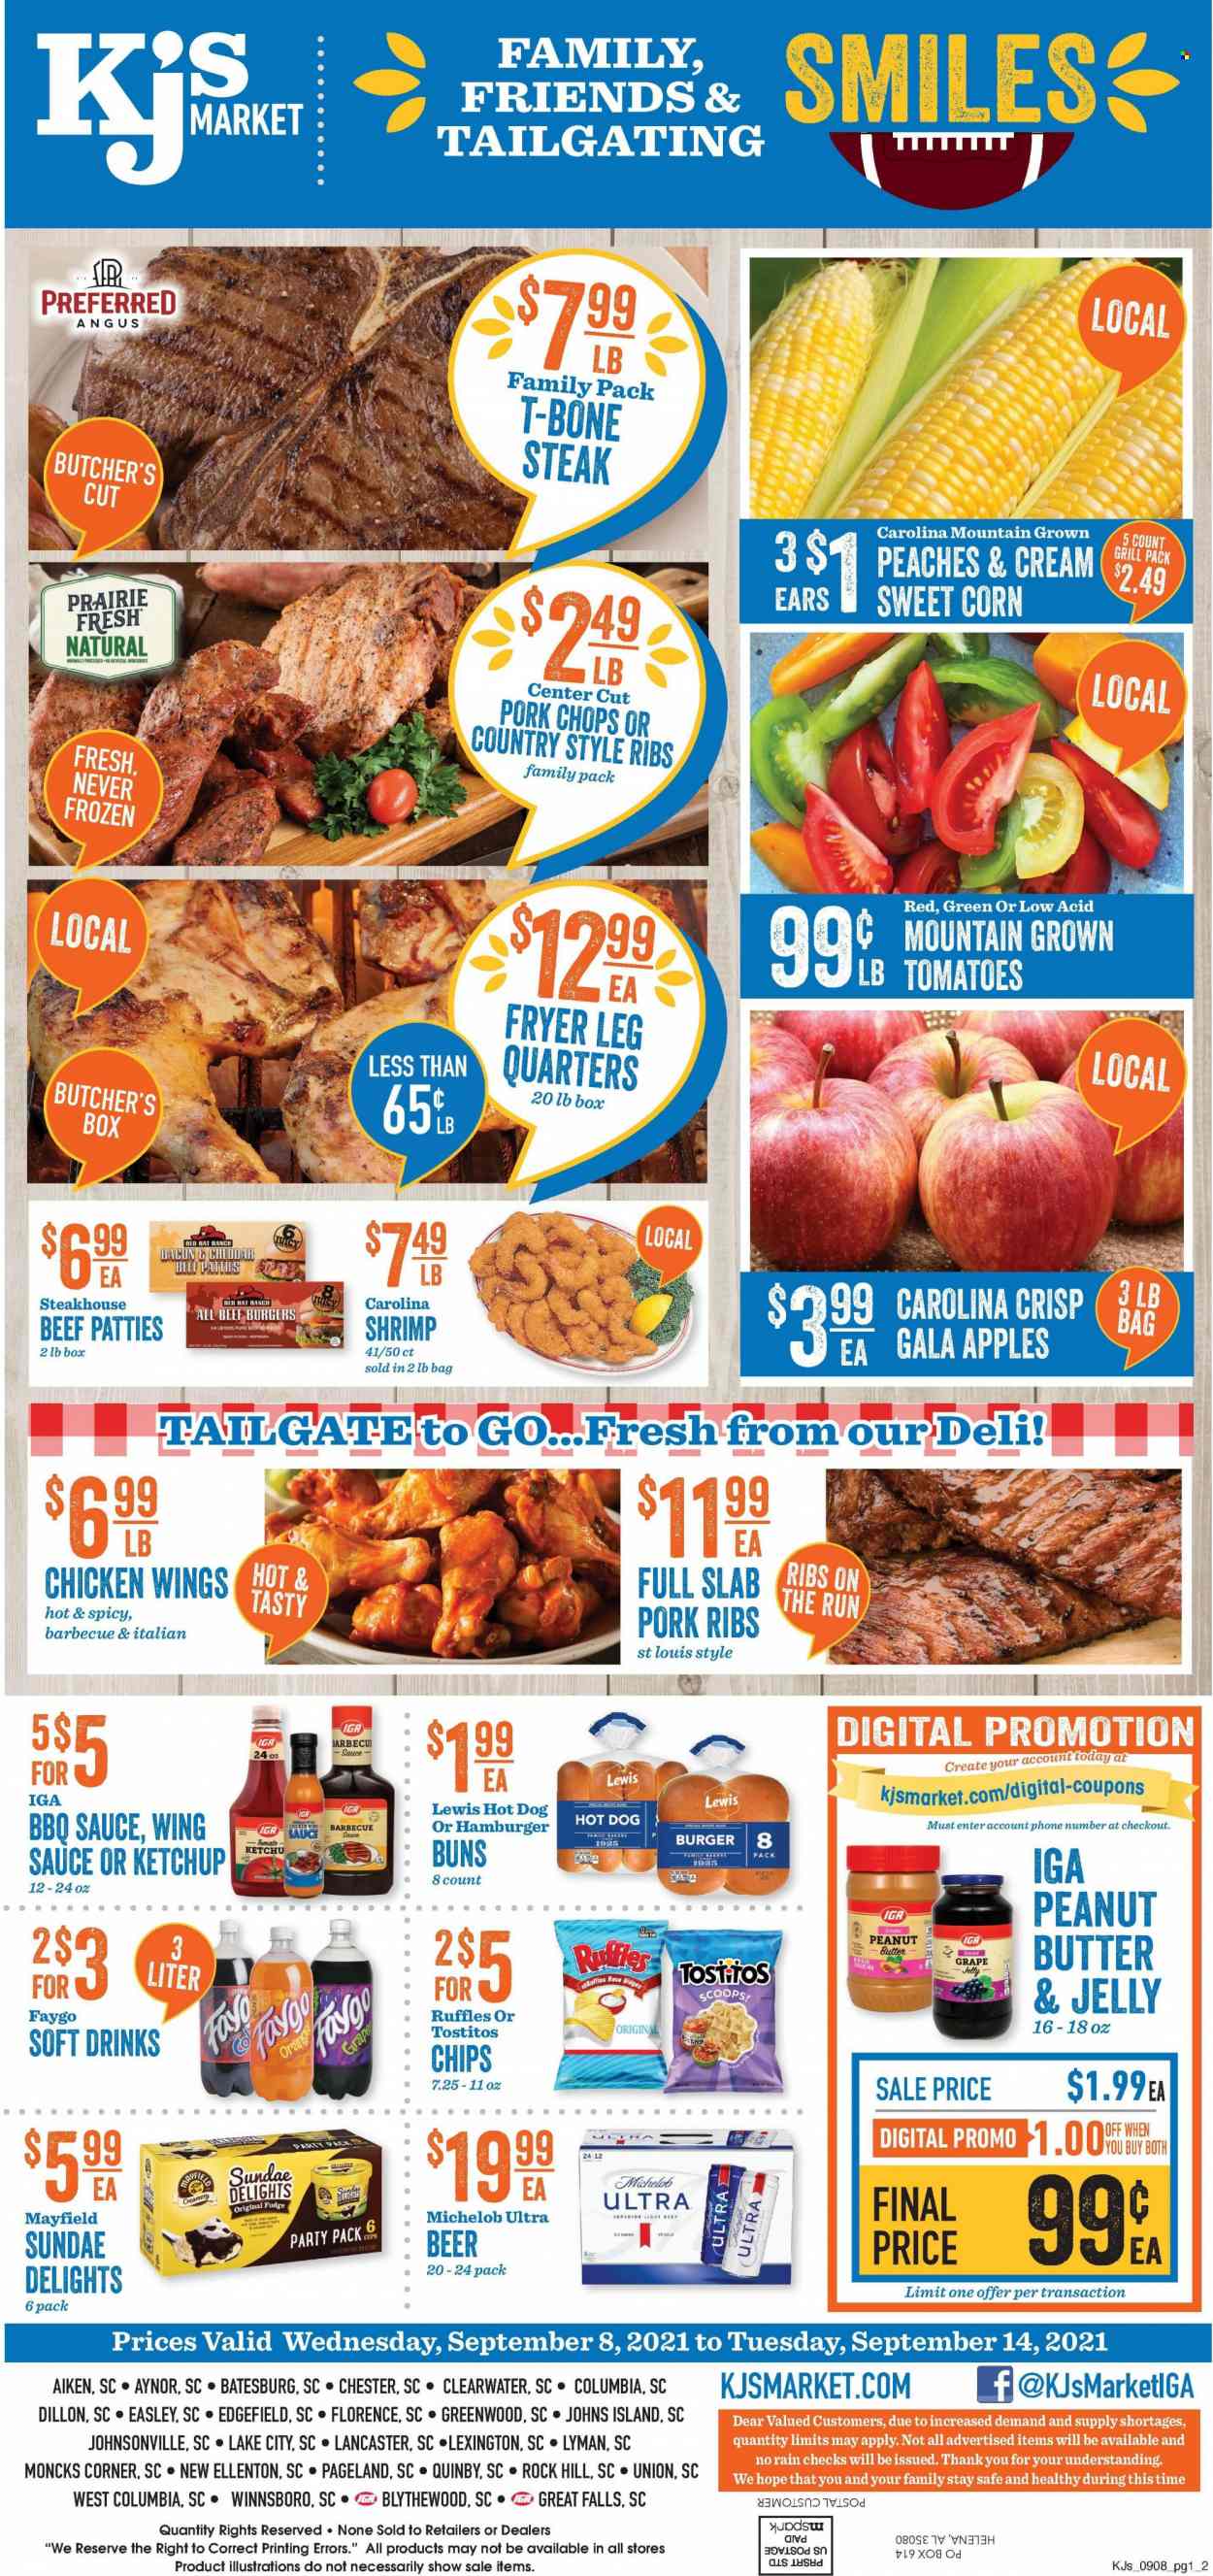 thumbnail - KJ´s Market Flyer - 09/08/2021 - 09/14/2021 - Sales products - buns, burger buns, corn, apples, Gala, shrimps, hot dog, beef burger, bacon, Johnsonville, cheese, chicken wings, fudge, jelly, Ruffles, Tostitos, BBQ sauce, ketchup, wing sauce, peanut butter, soft drink, beer, beef meat, t-bone steak, steak, pork chops, pork meat, pork ribs, country style ribs, Bakers, grill, Michelob, peaches. Page 1.